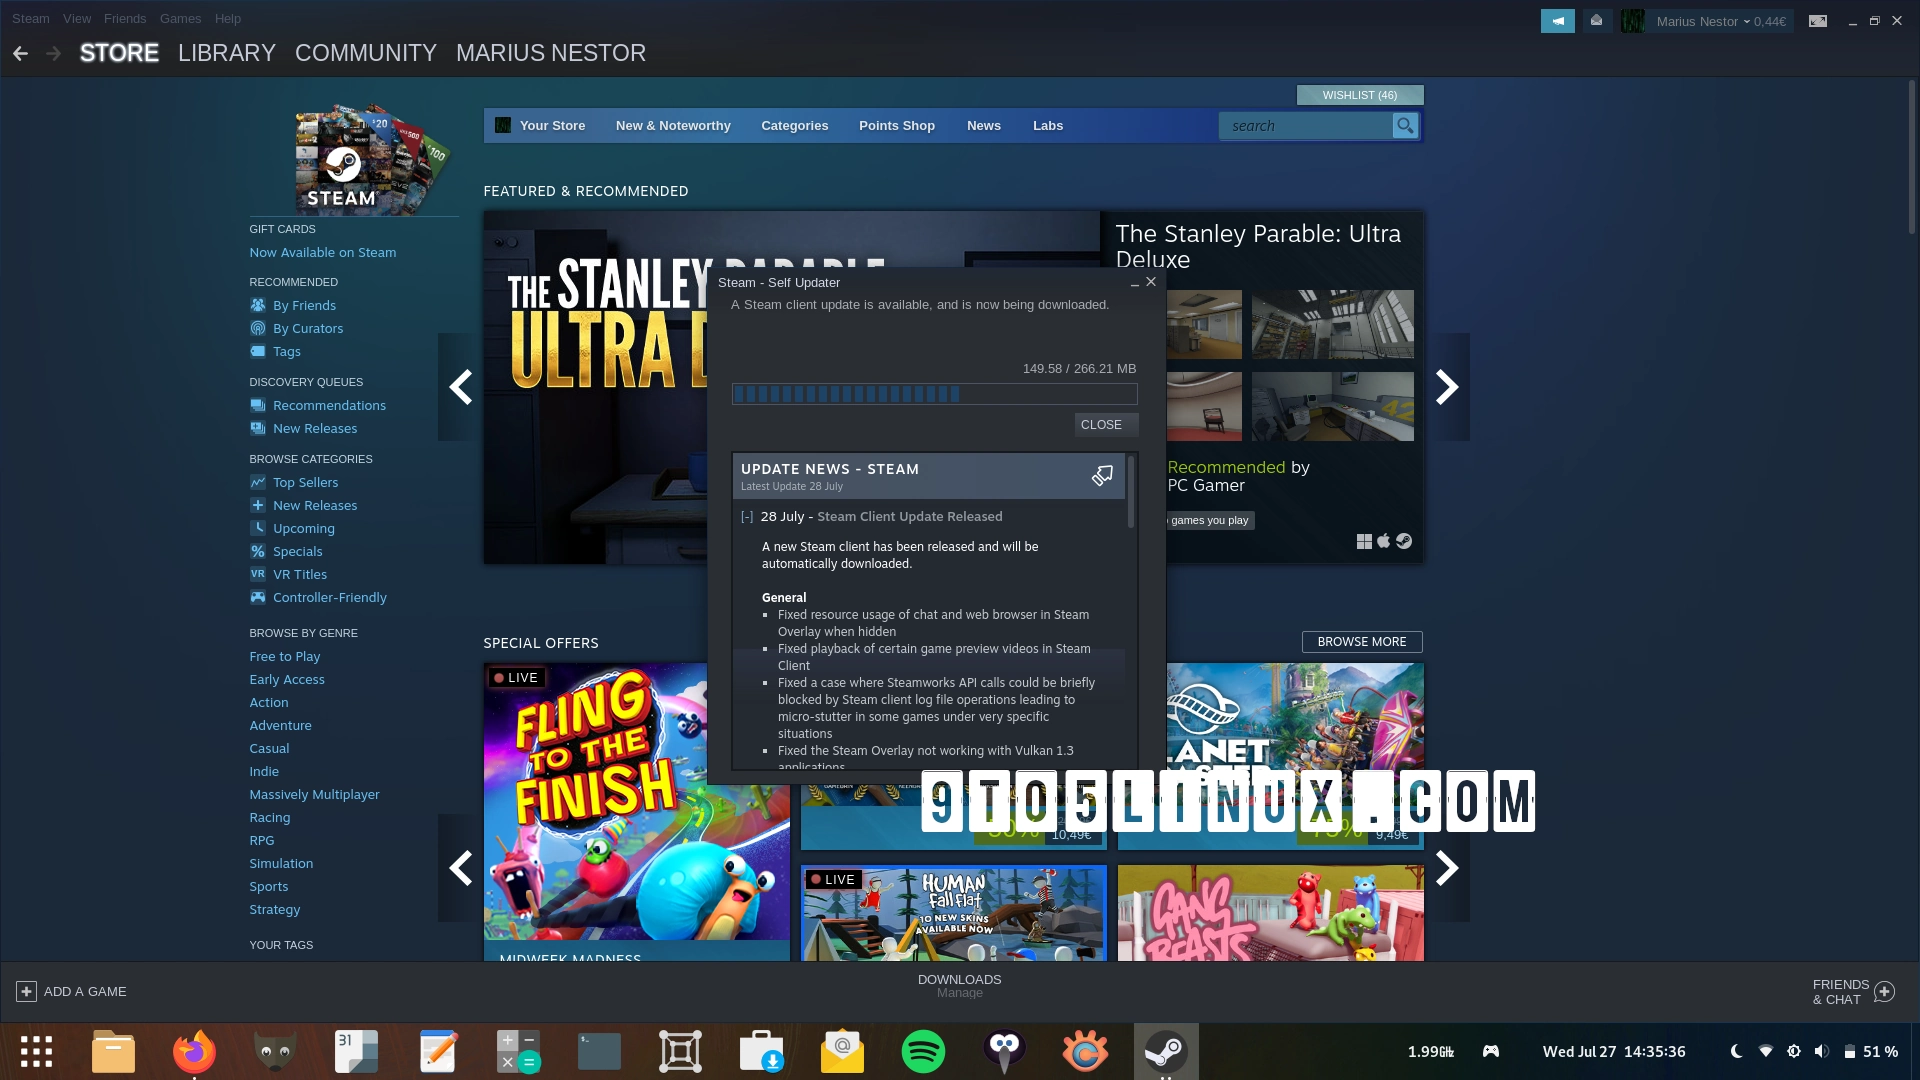 Latest Steam Client Update Brings Linux and Vulkan Fixes, Support for New Controllers